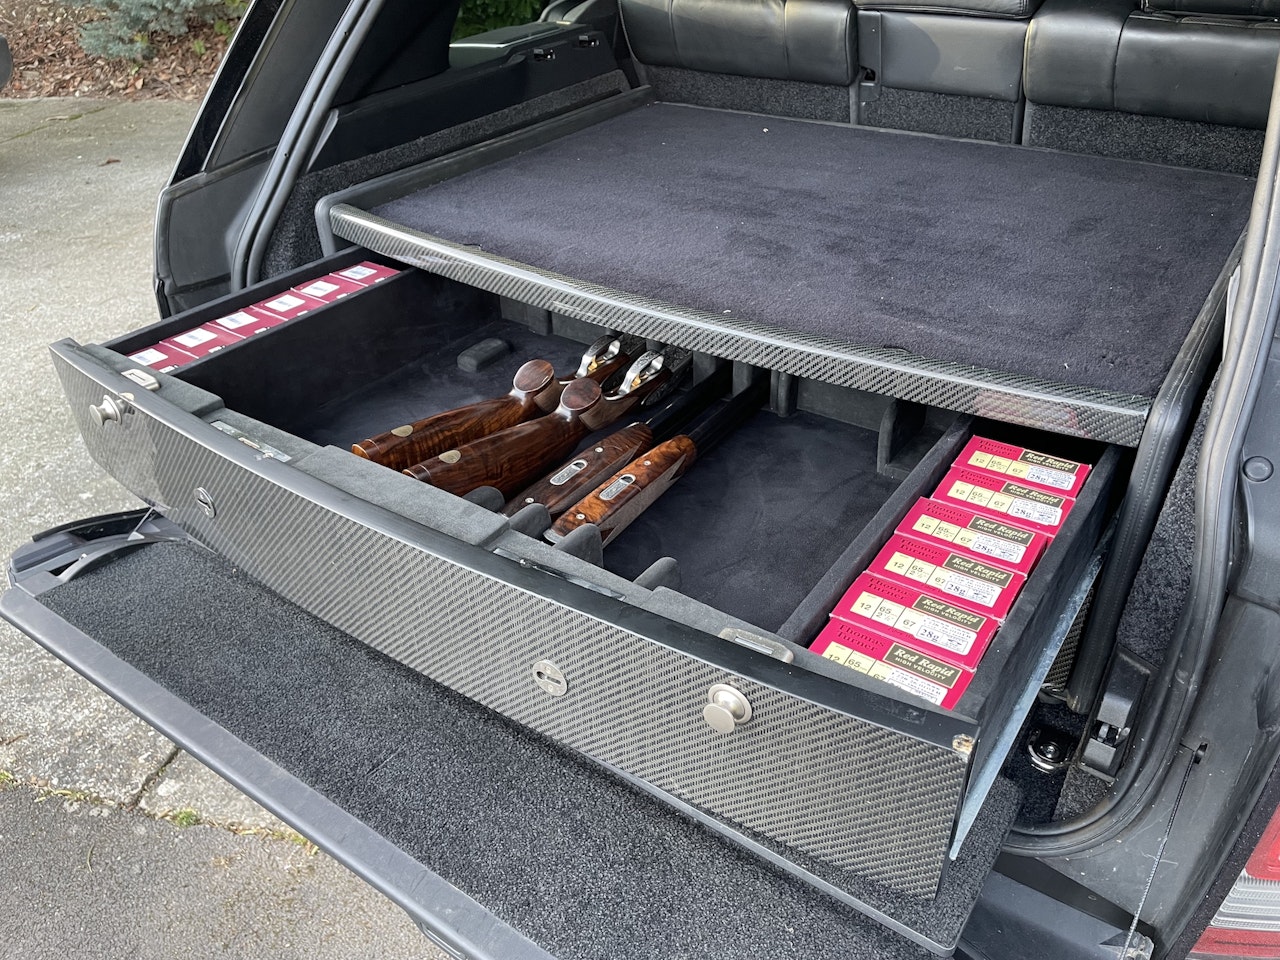 RANGE ROVER GUN BOX for sale by auction in Marlow, Buckinghamshire, United  Kingdom